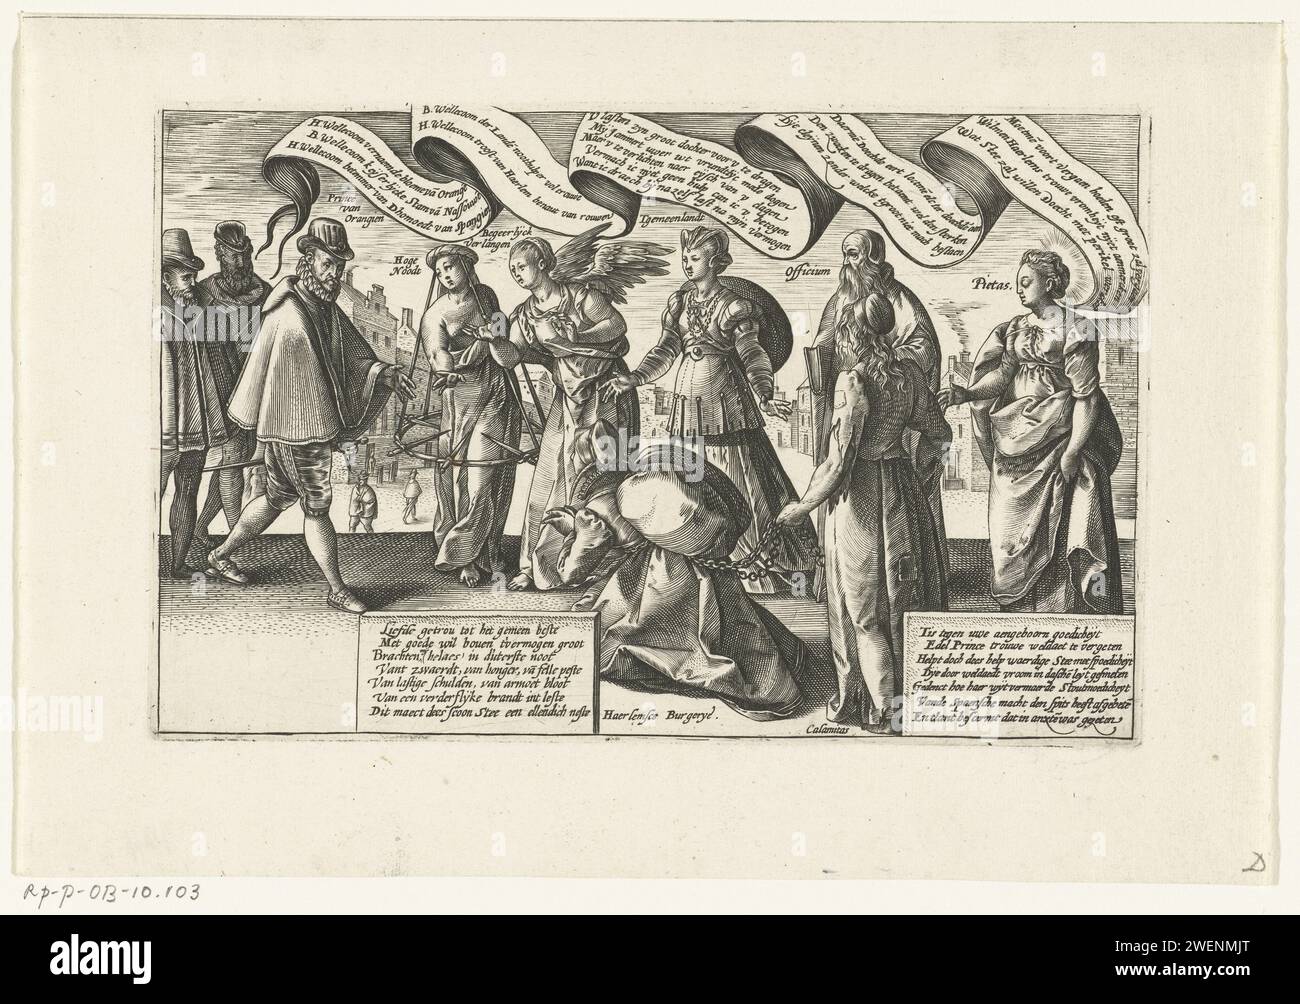 Haarlem Burgerij asks Willem van Oranje for help, 1578 - 1580 print Allegorical performance in which the bourgeoisie of Haarlem begs the Prince of Orange for help, ca. 1577-1579. The prince is approached by the personifications of Haarlem bourgeoisie kneeled on the basis of disaster (Calamitas). Upstairs to right high need, desirable desire, public interest (tgemelandt), board (officium) and piety (Pietas). In the show a banderole and cartouches with text as speech bubbles spoken by the characters. In the text of Haarlem's bourgeoisie, reference is made to 'a further flying burnt int leste', t Stock Photo